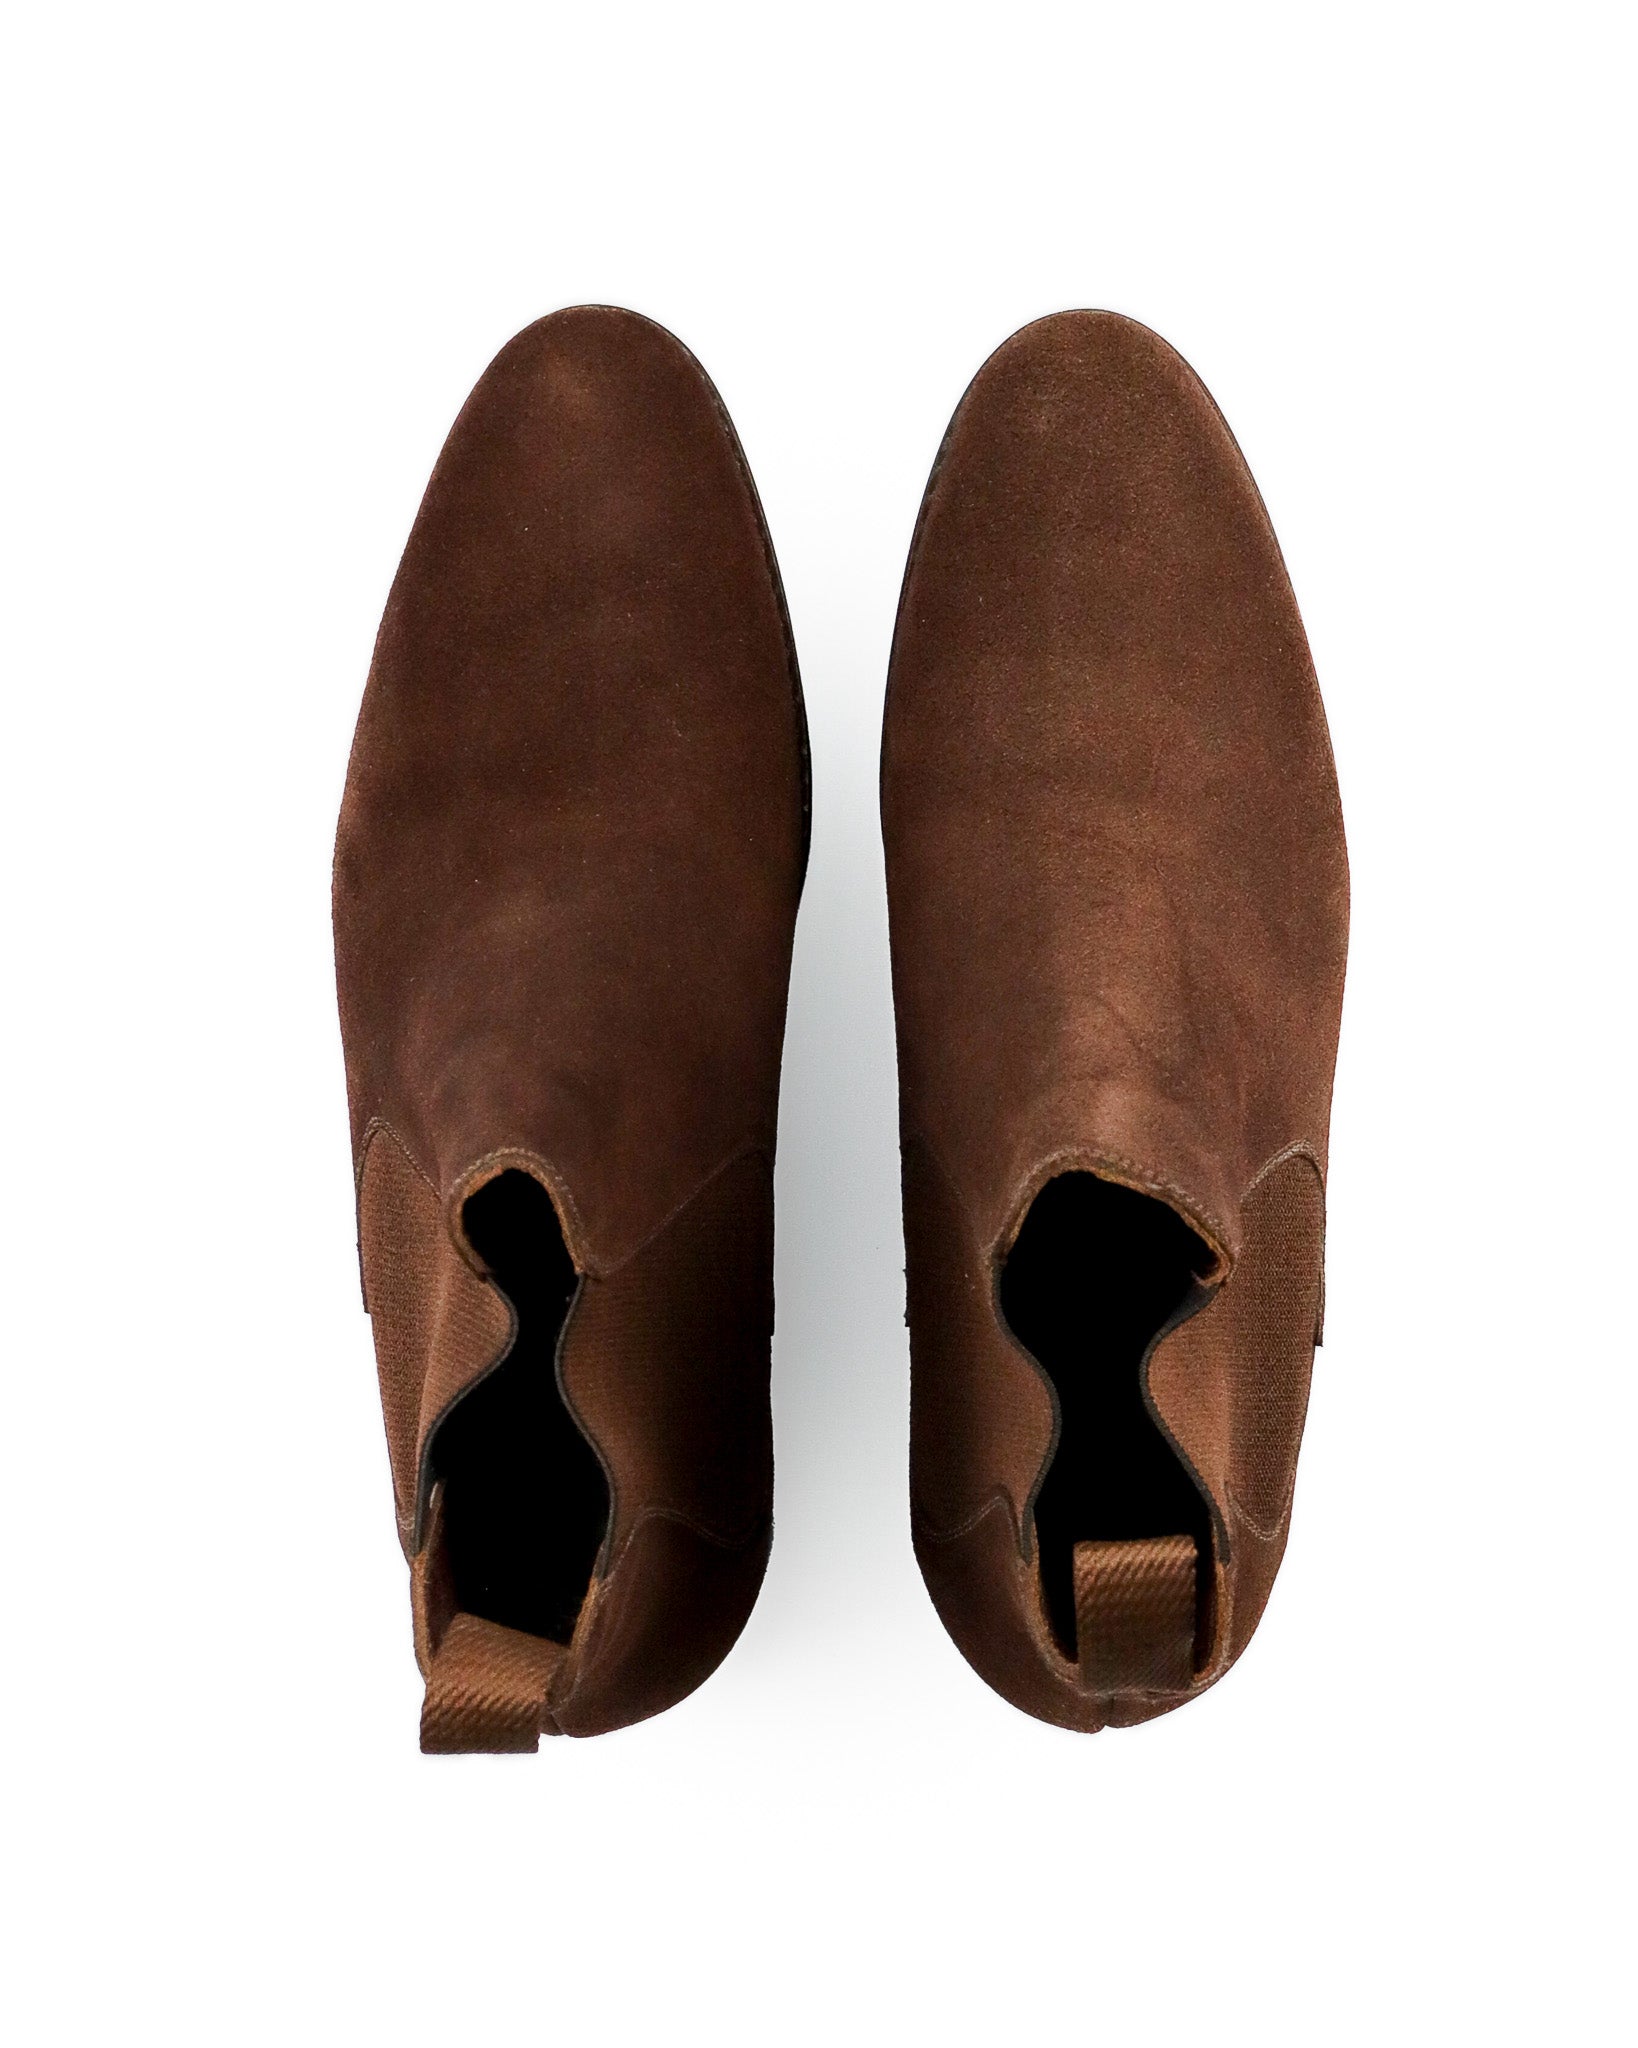 Chelsea boots - Paul handcrafted mahogany